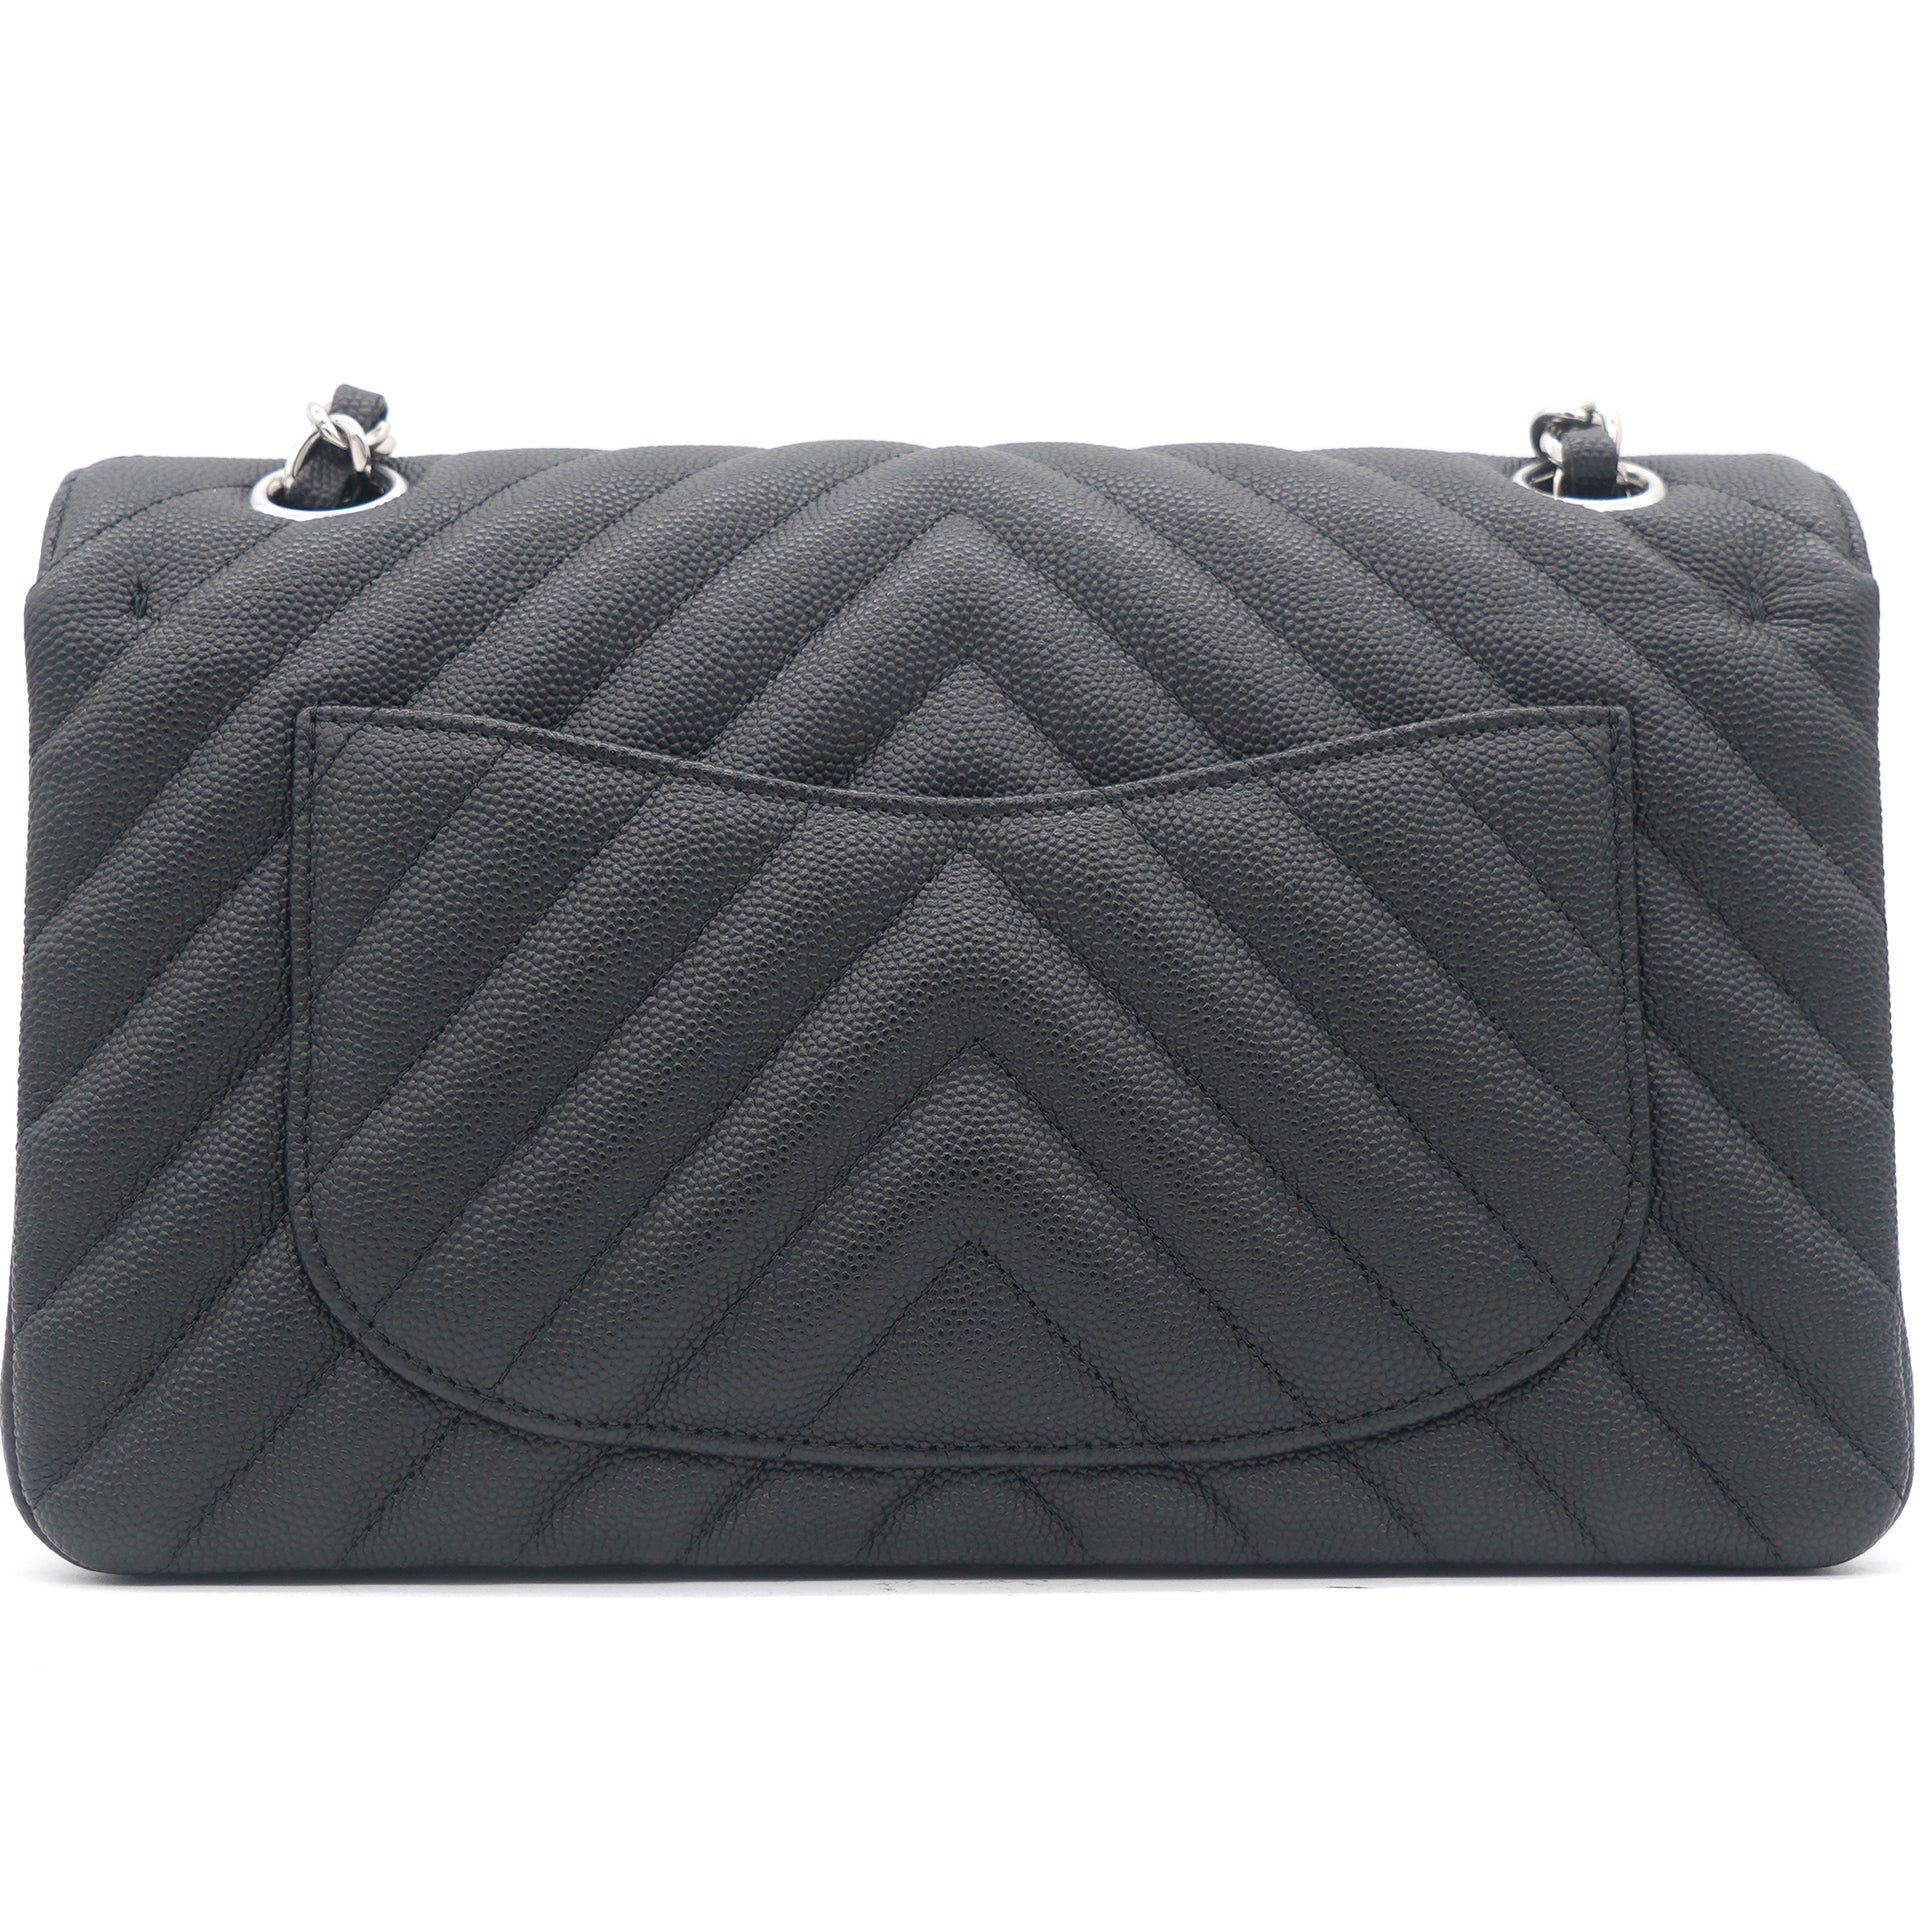 Caviar Chevron Quilted Small Double Flap Black